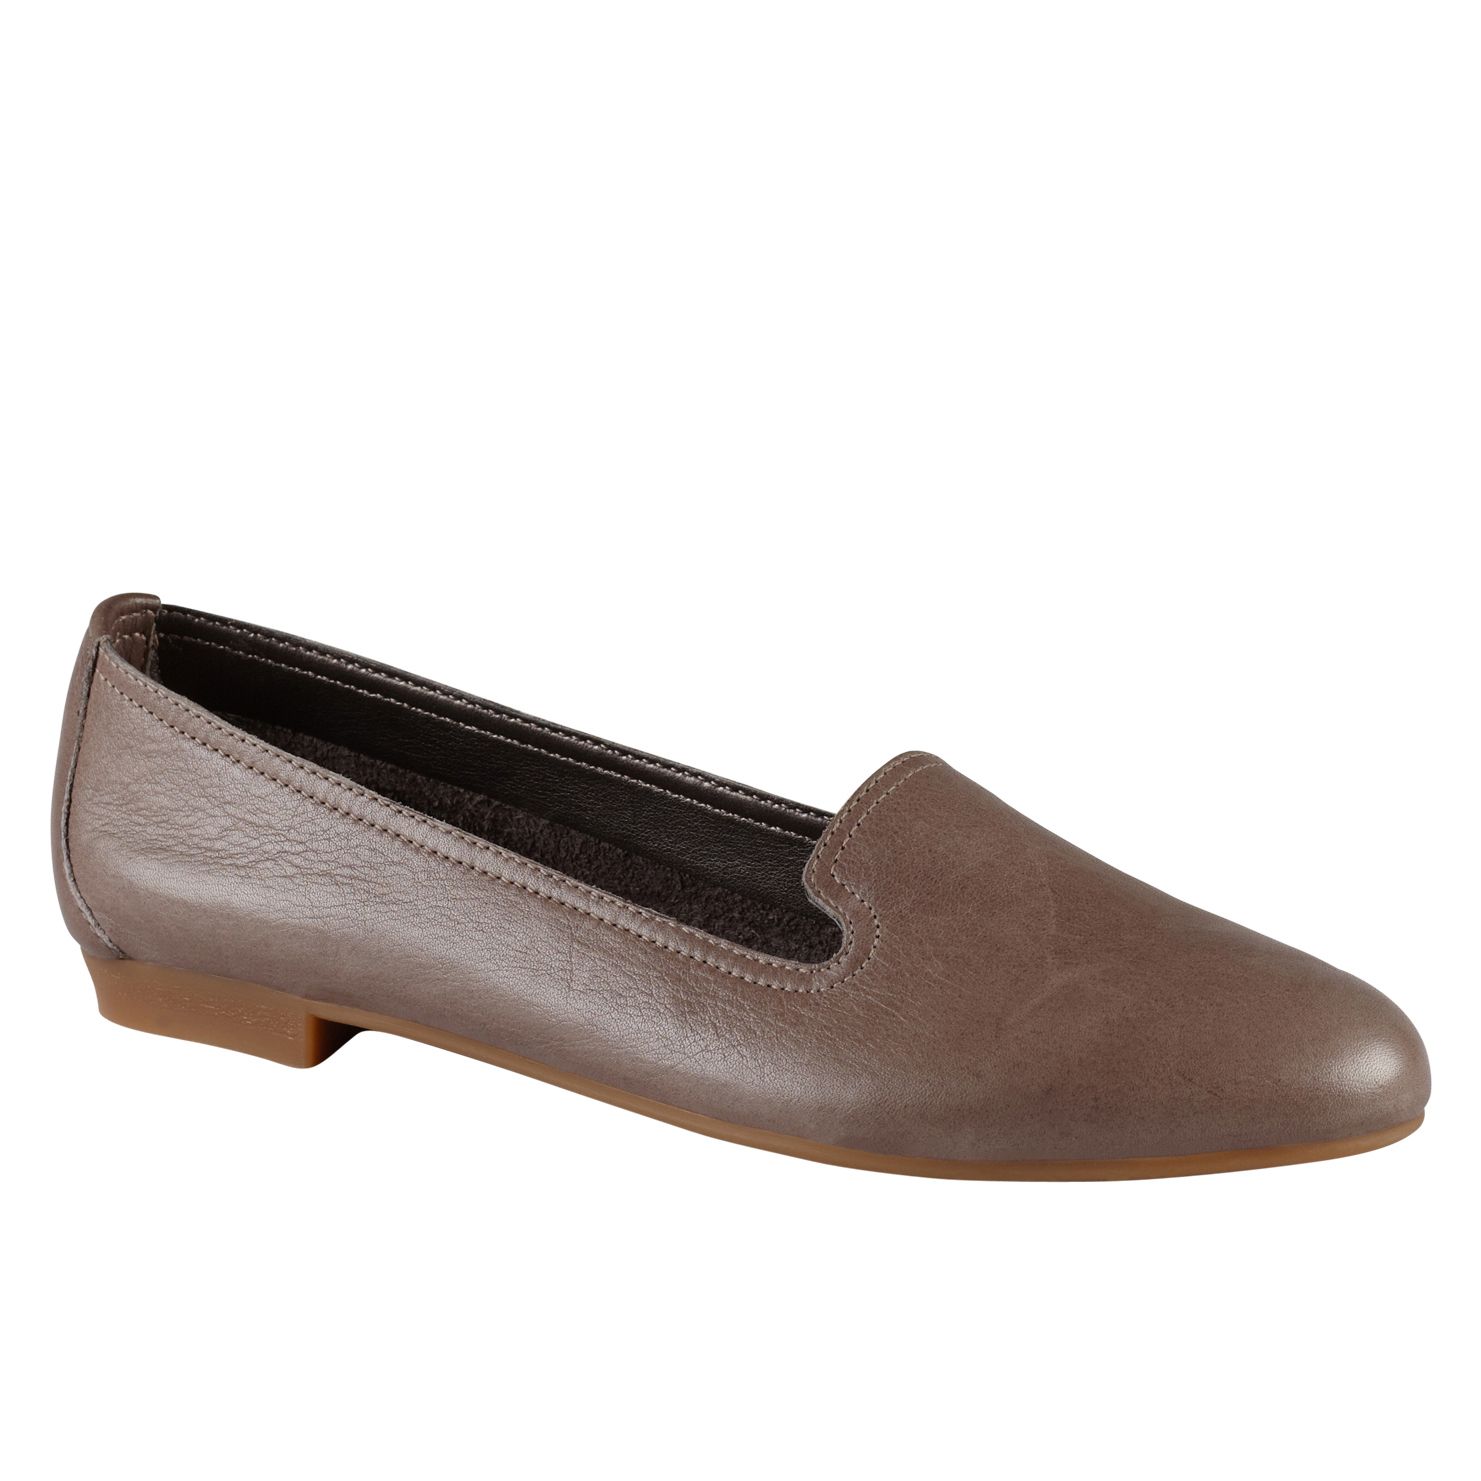 Aldo zenica leather loafer shoes. Simple yet trendy, this cute loafer ...